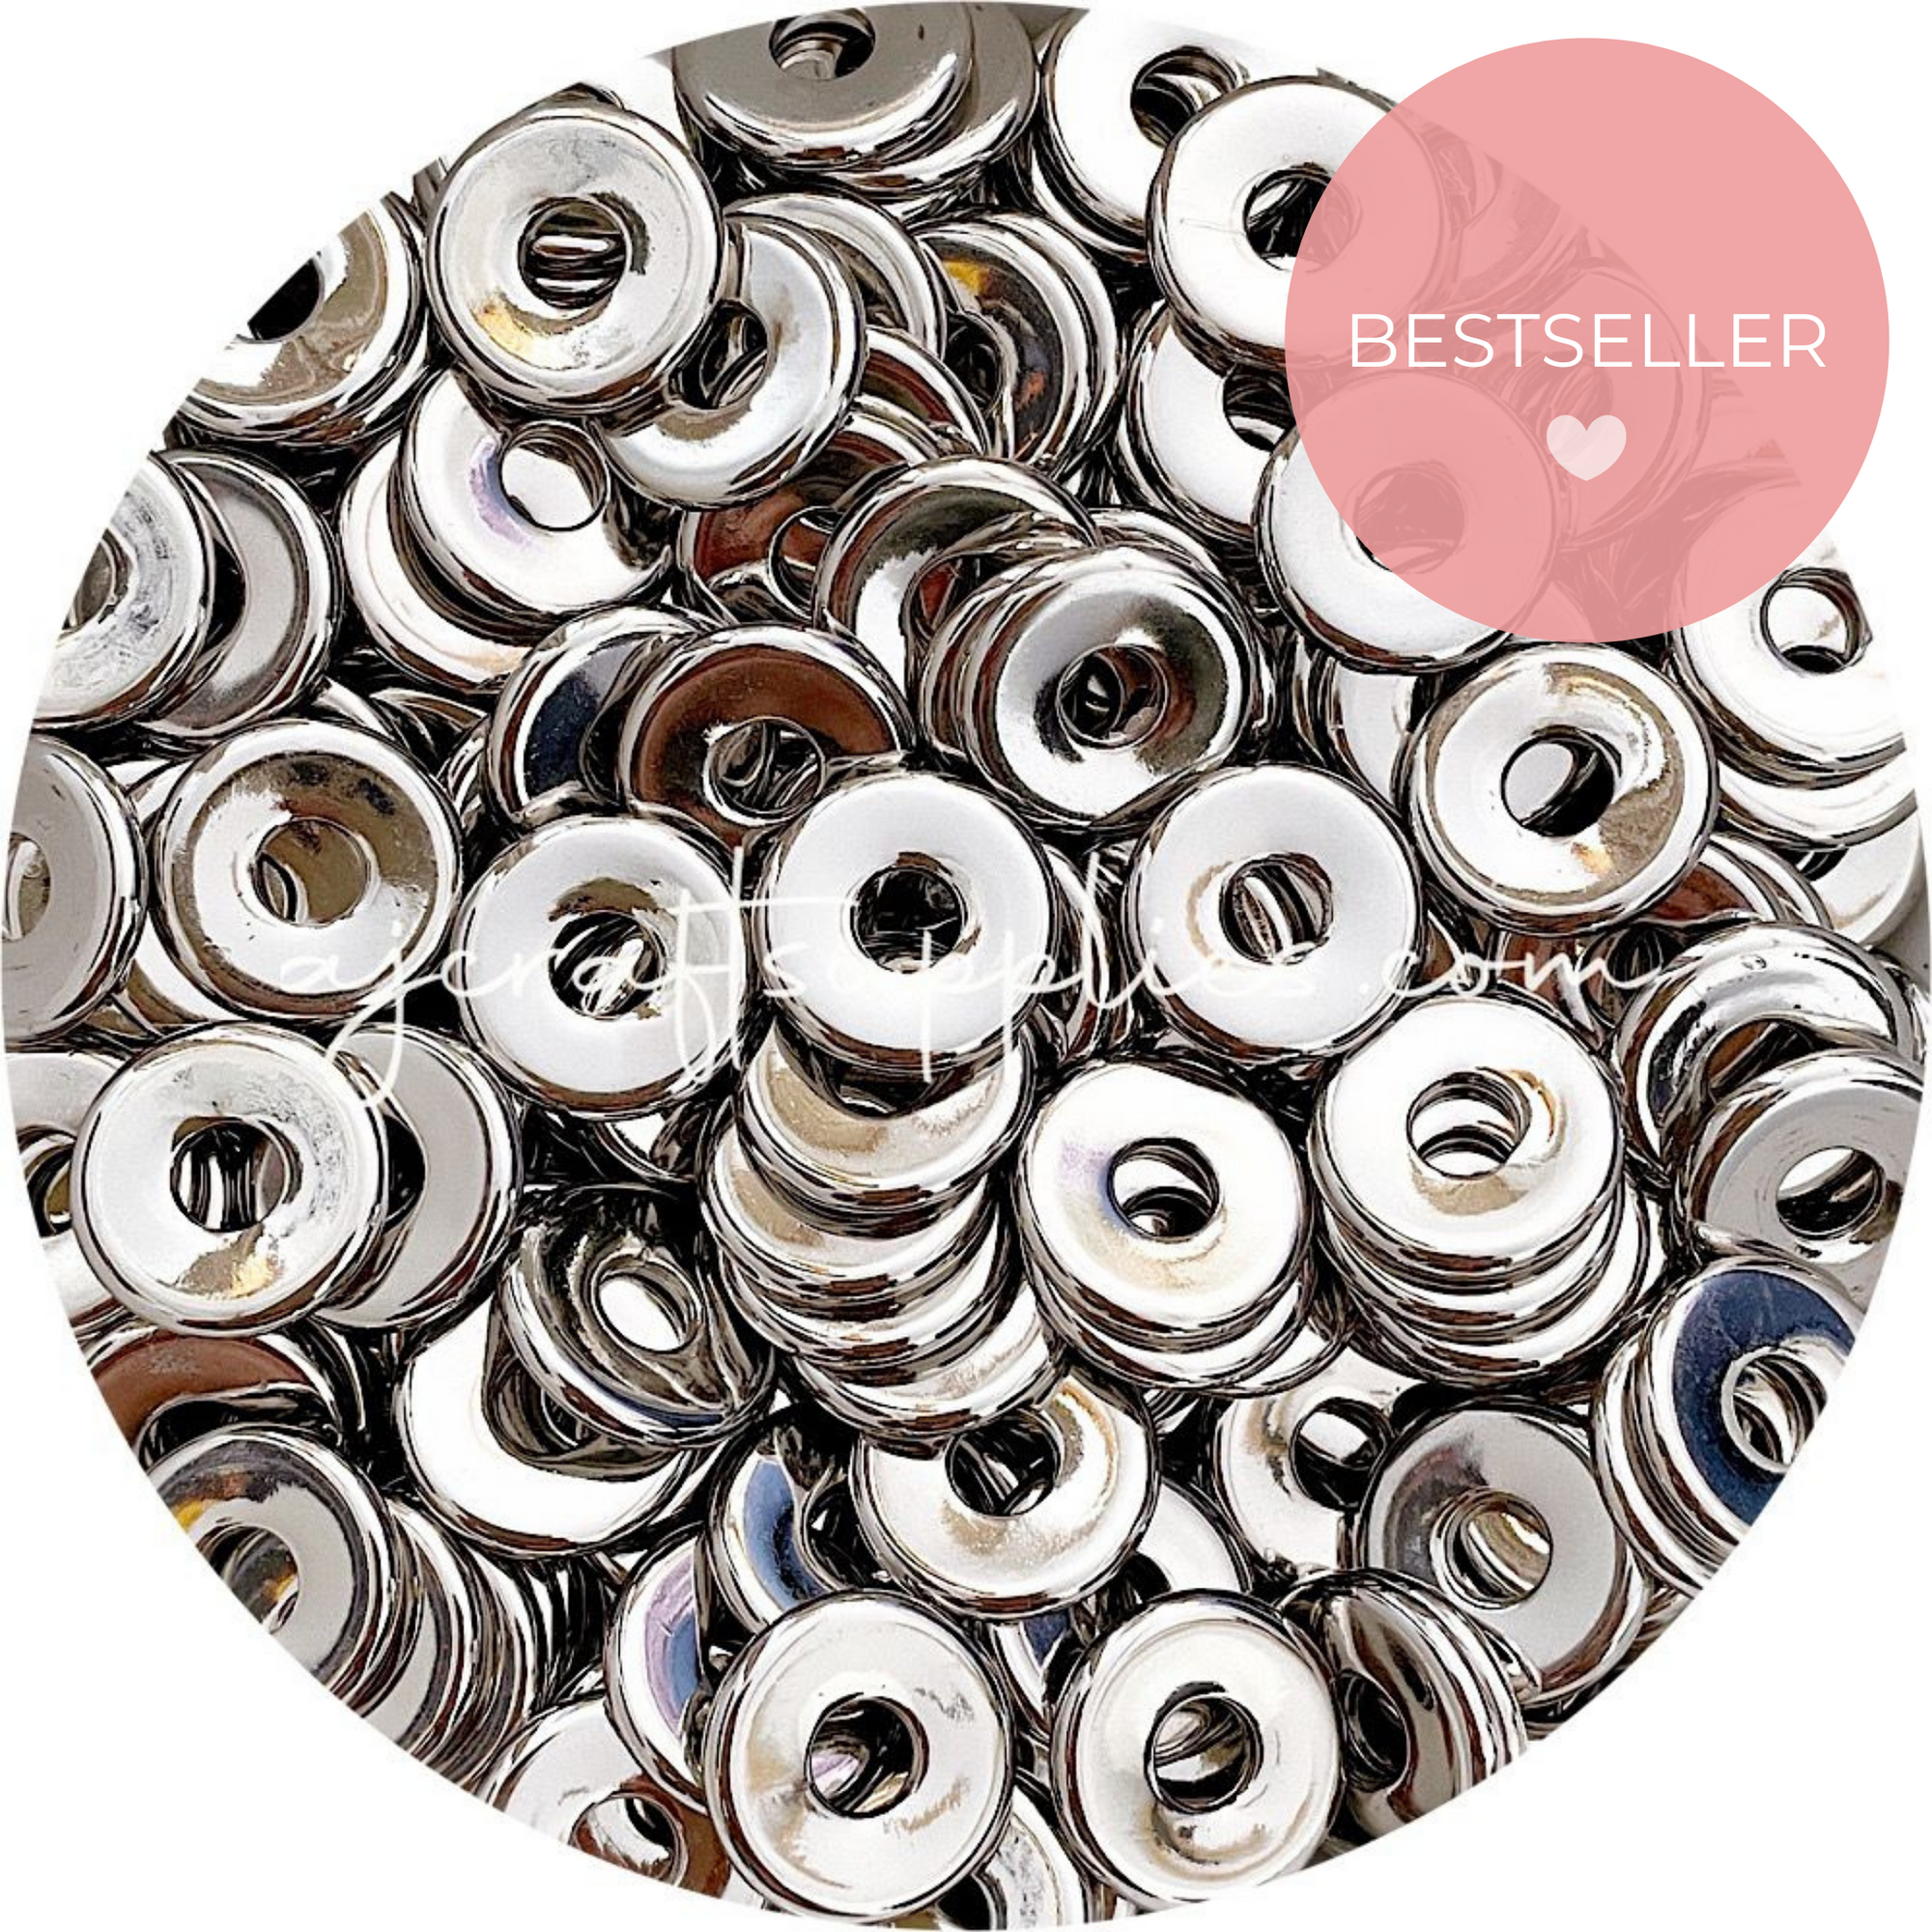 20mm Flat Coin Acrylic Spacer Beads (with Large Hole) - Silver - 5 Beads